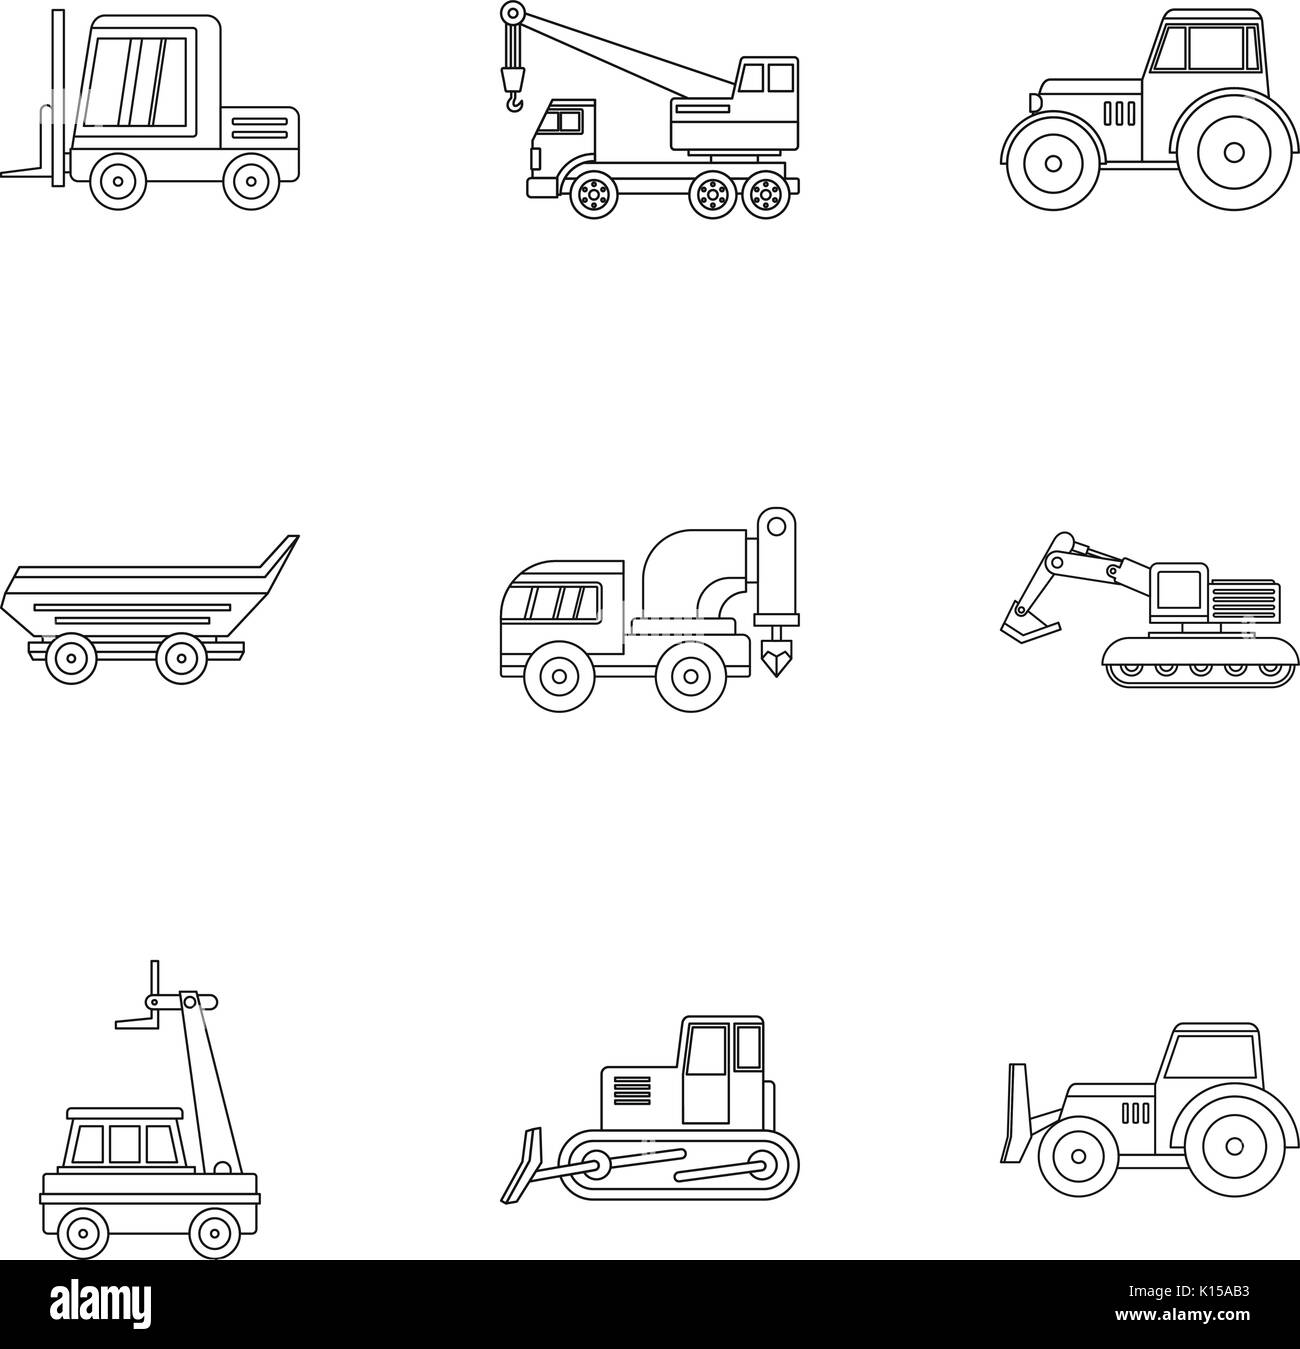 Industrial heavy vehicle icon set, outline style Stock Vector